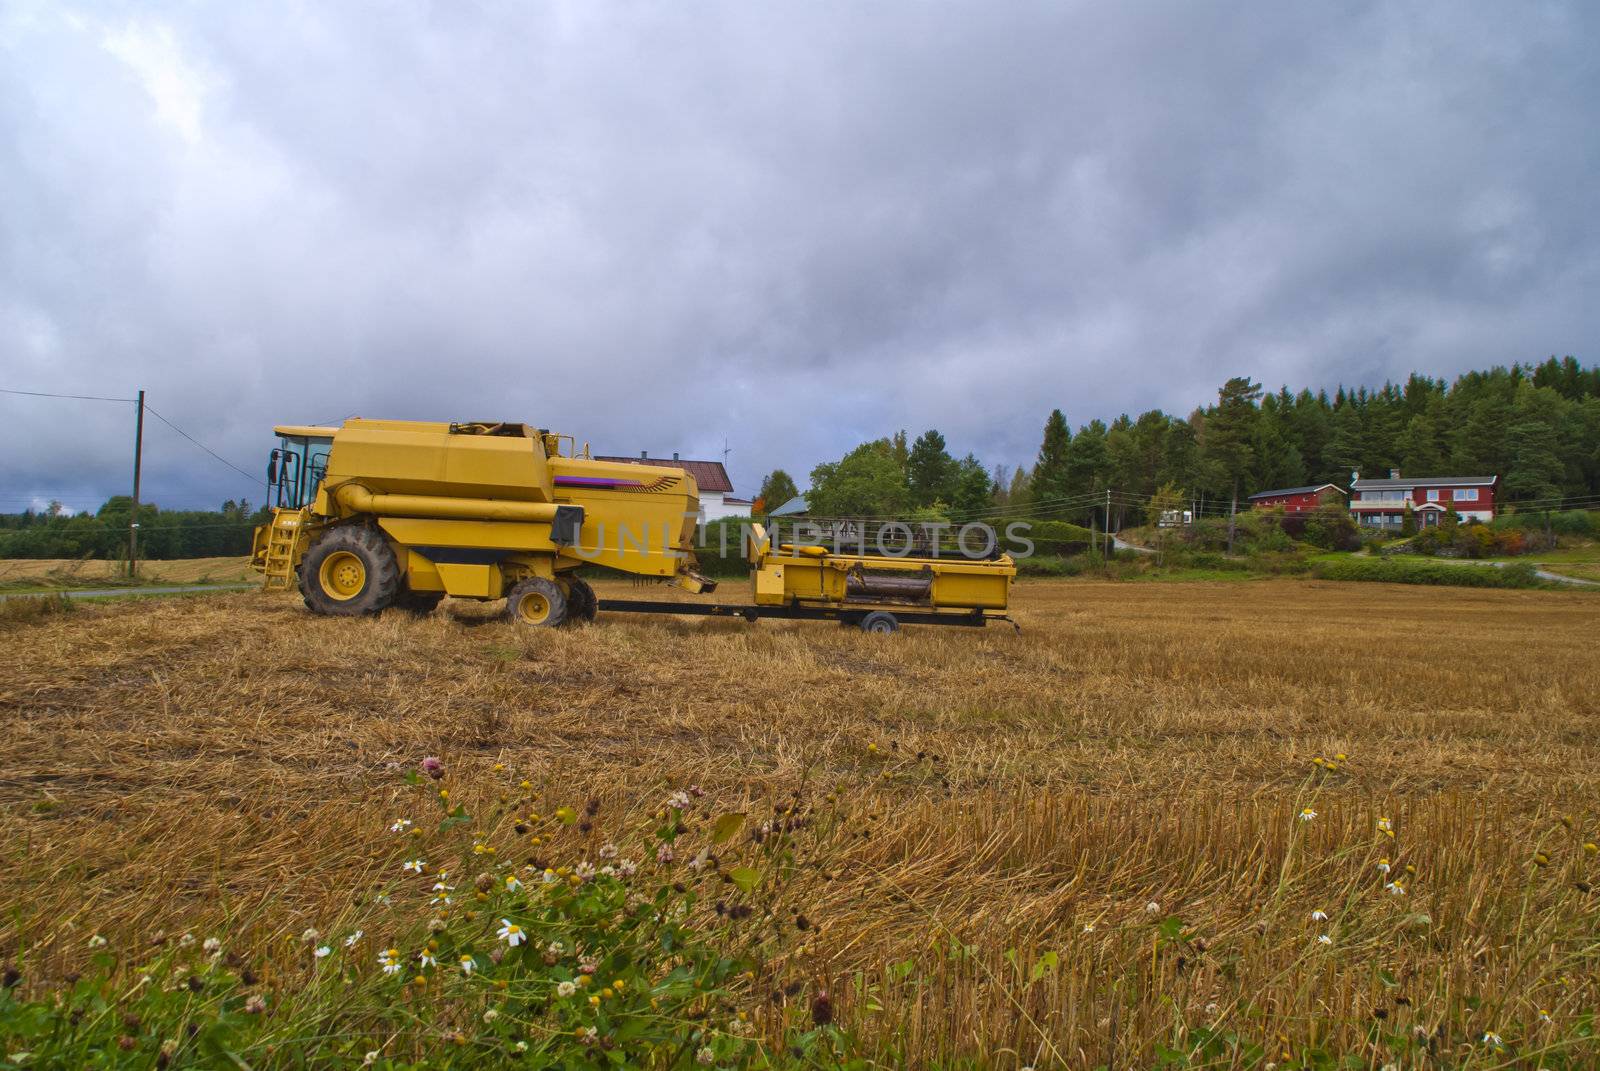 combine harvesters, new holland tx62 in a field in a rural village in halden called asak, image is shot in september 2012